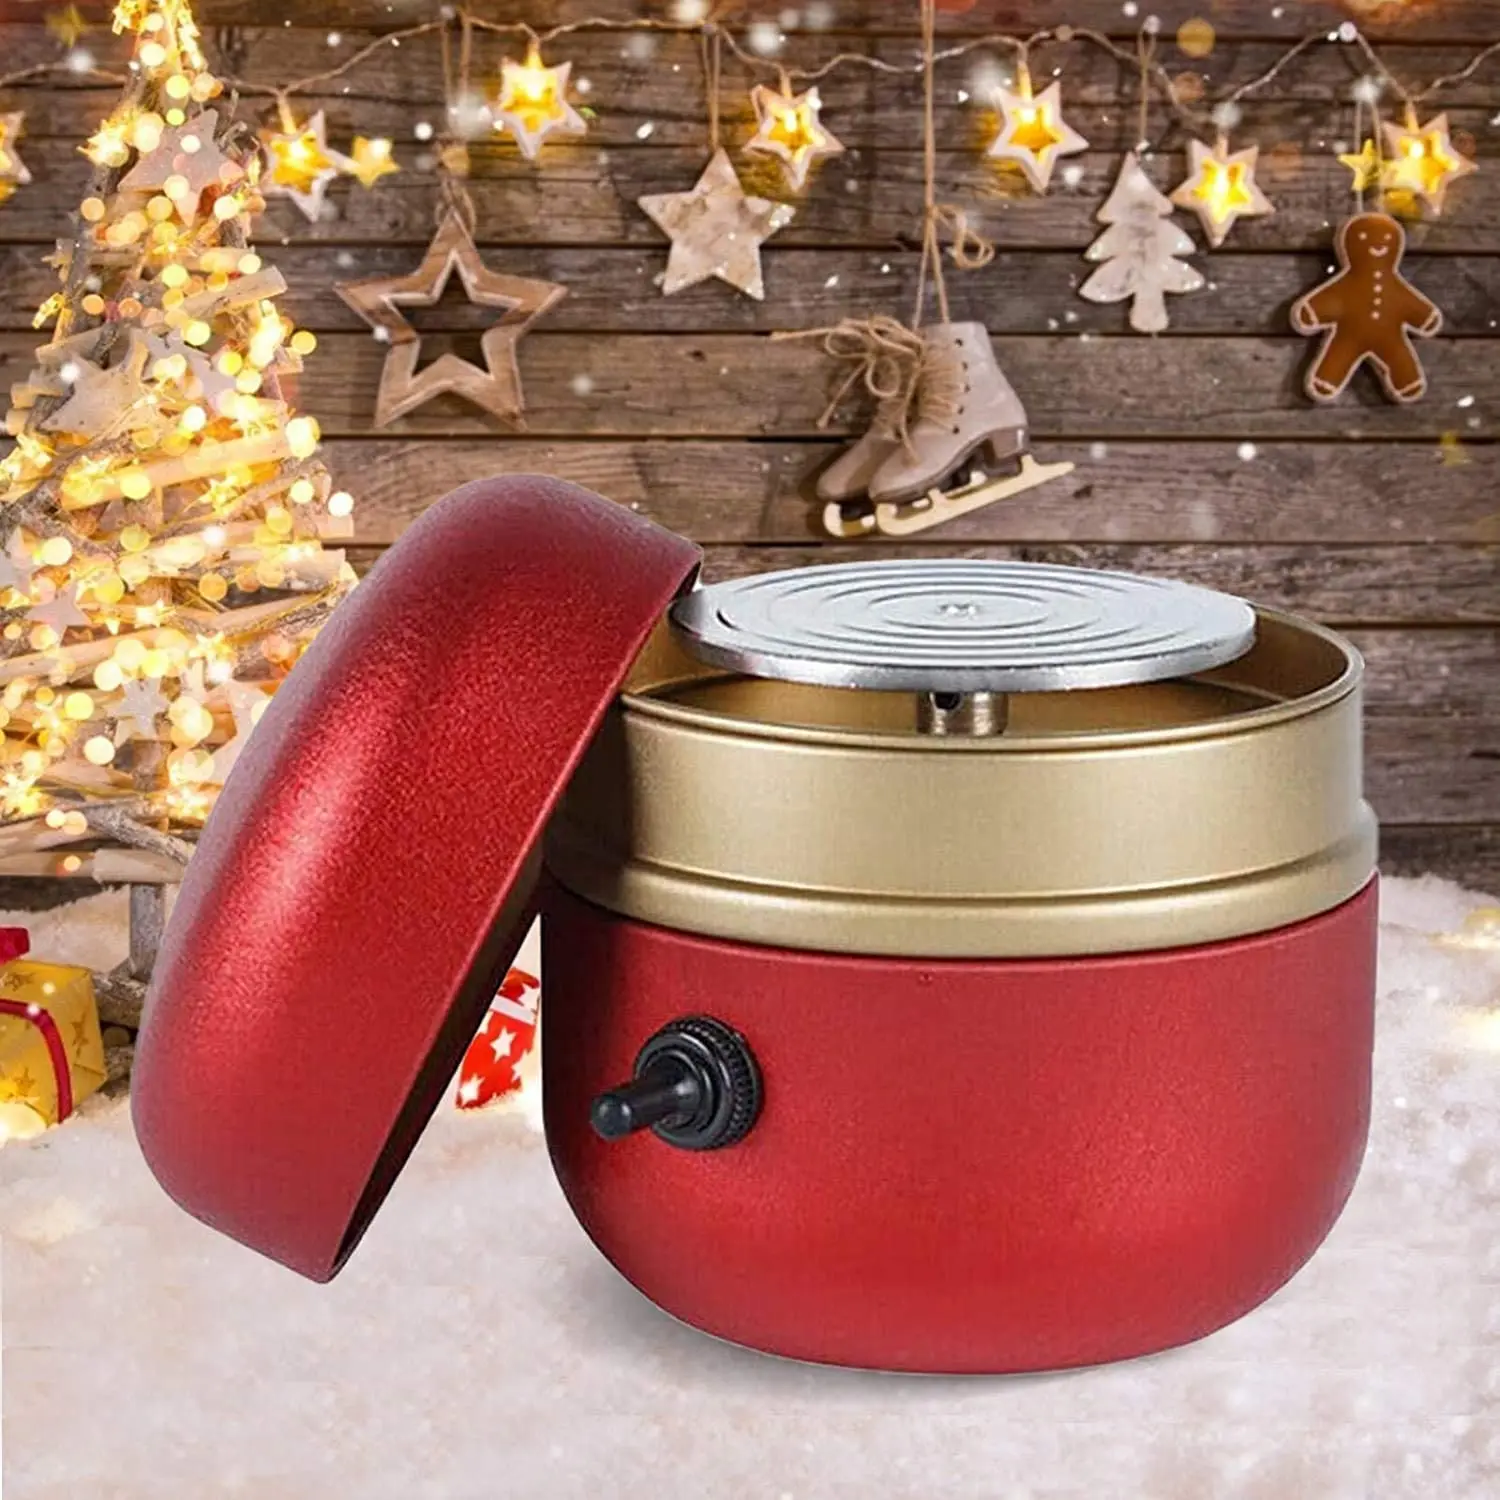 Rose Red 1500RPM Adjustable Speed Mini Electric Pottery Machine with Tray for DIY Ceramic Work Clay Art Craft Christmas/Birthday Gift DOMINTY Mini Electric Pottery Wheel Machine 